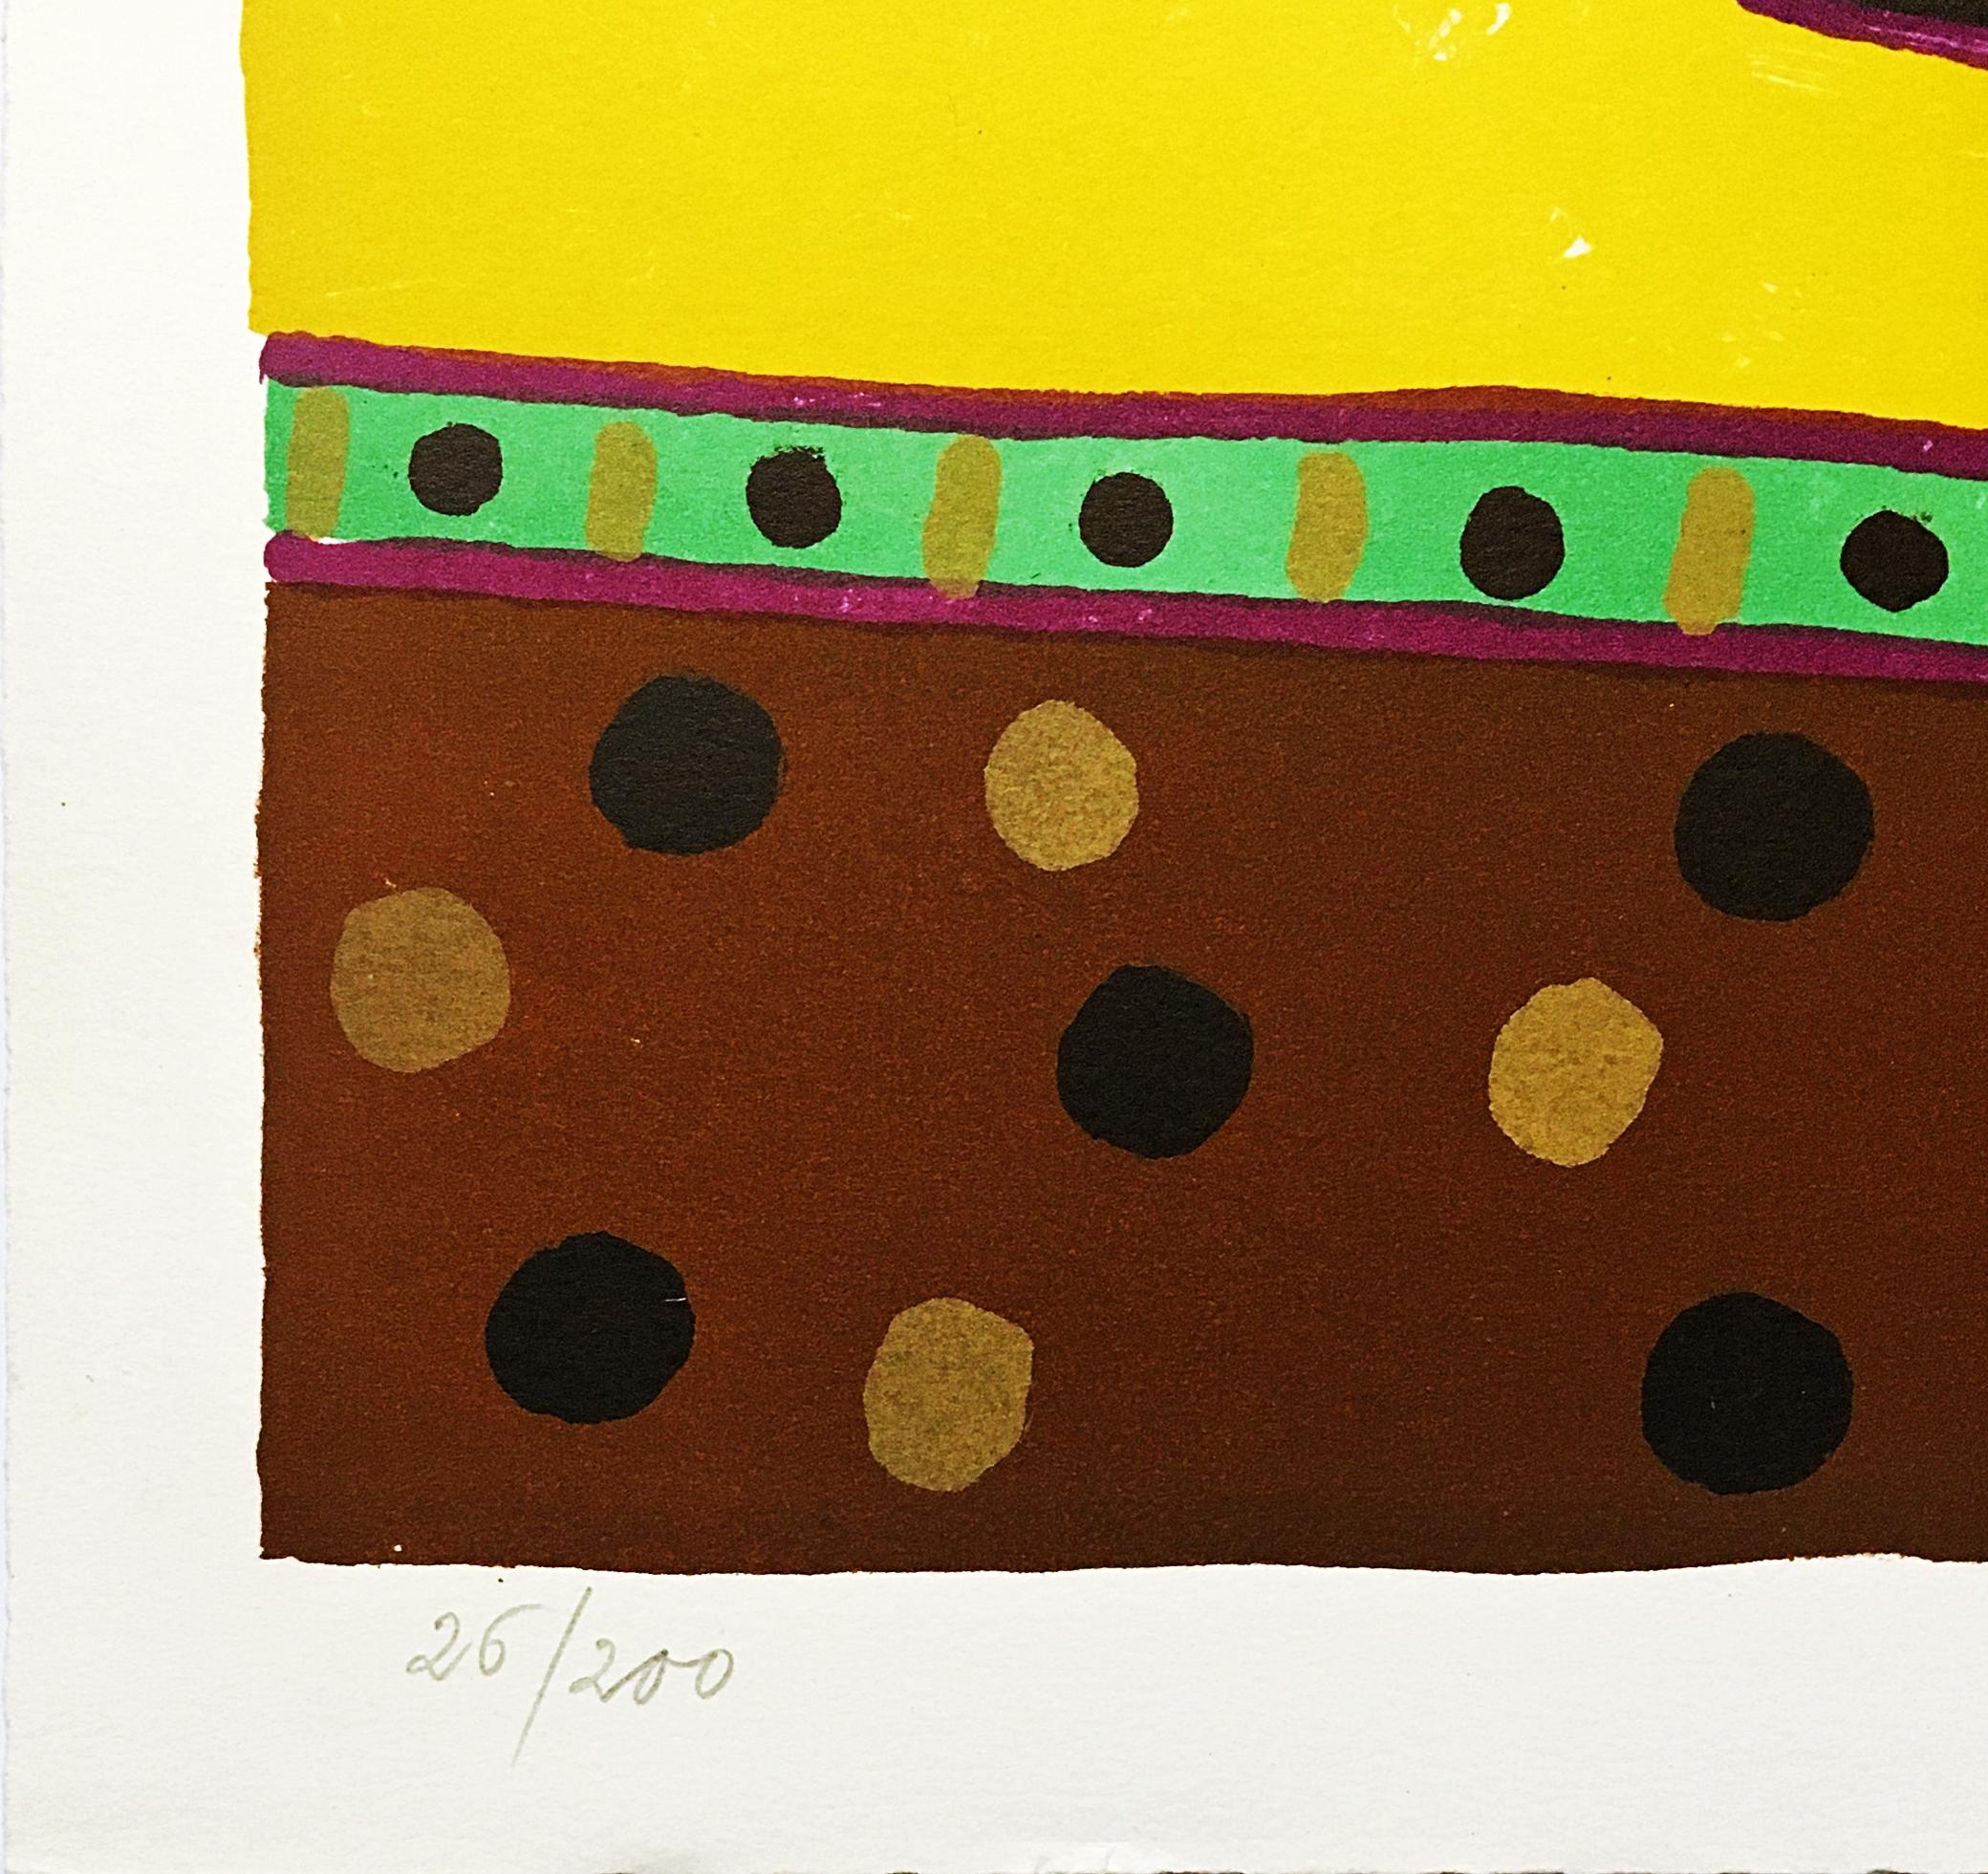 Alan Davie
Guli Wall, 1971
Lithograph on Rives BFK Paper with Deckled Edges
Hand signed, numbered 26/200 and dated on the lower front
20 × 25 1/2 inches
Unframed
This whimsical mid-century modern hand signed, dated and numbered print by renowned